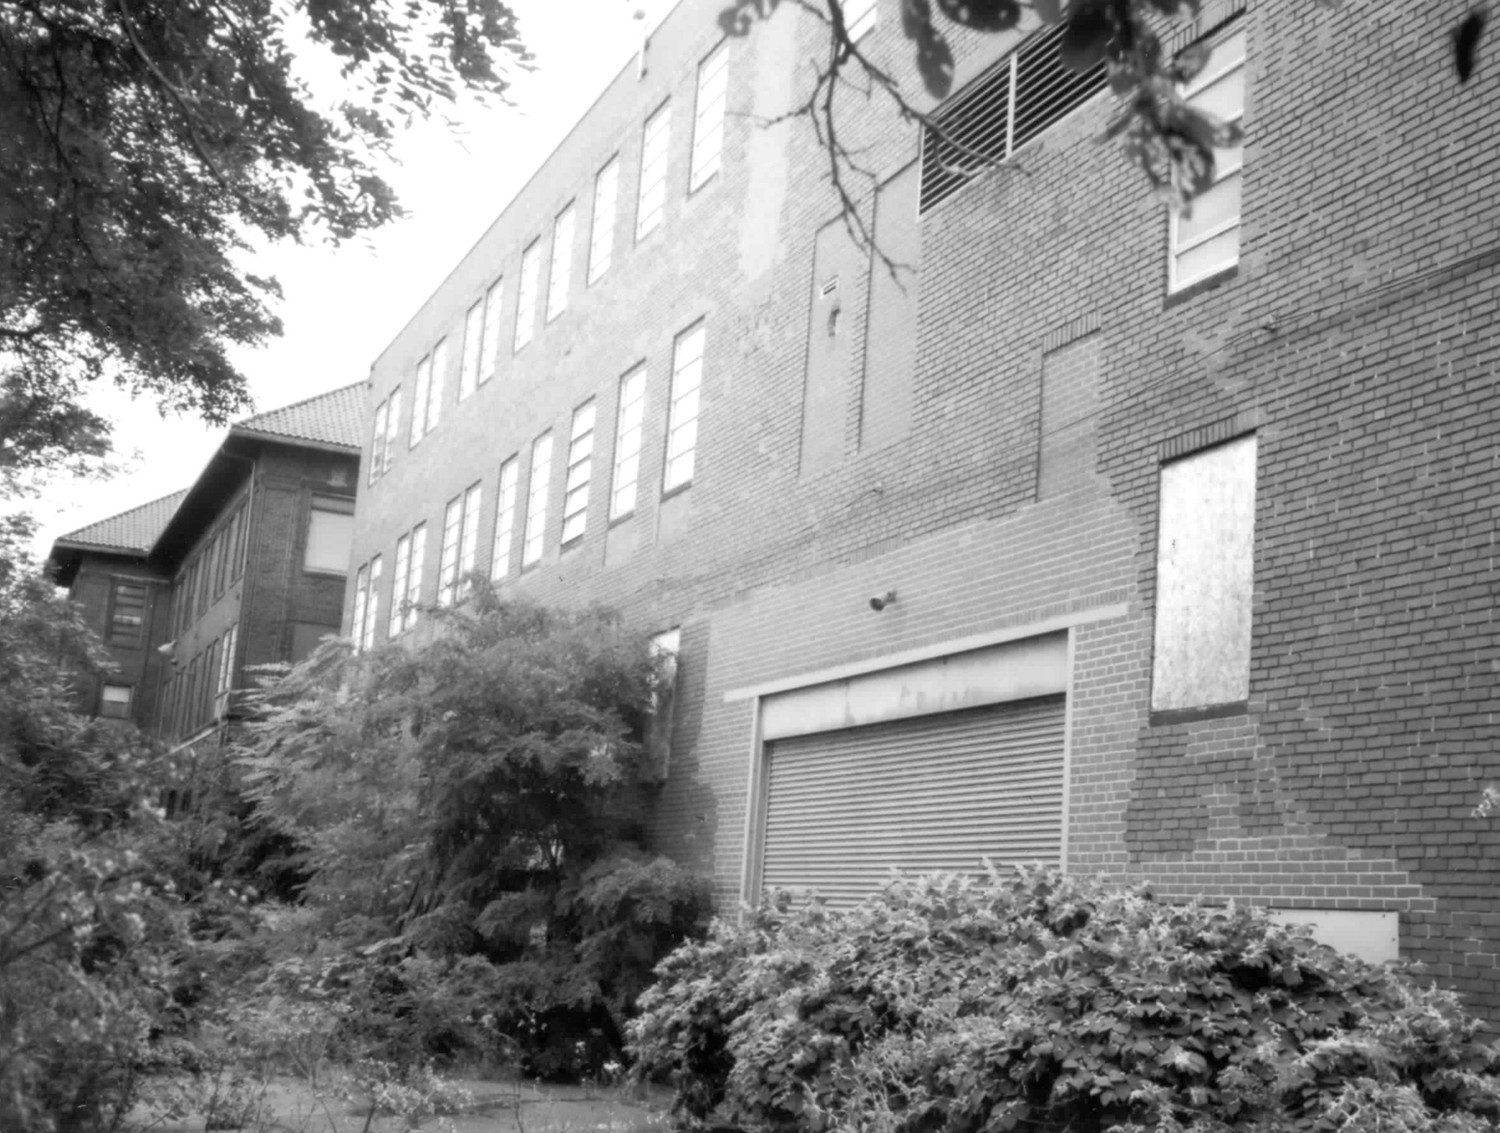 Tuberculosis Hospital of Pittsburgh, Pittsburgh Pennsylvania Building 'B', North elevation, looking southeast (1989)